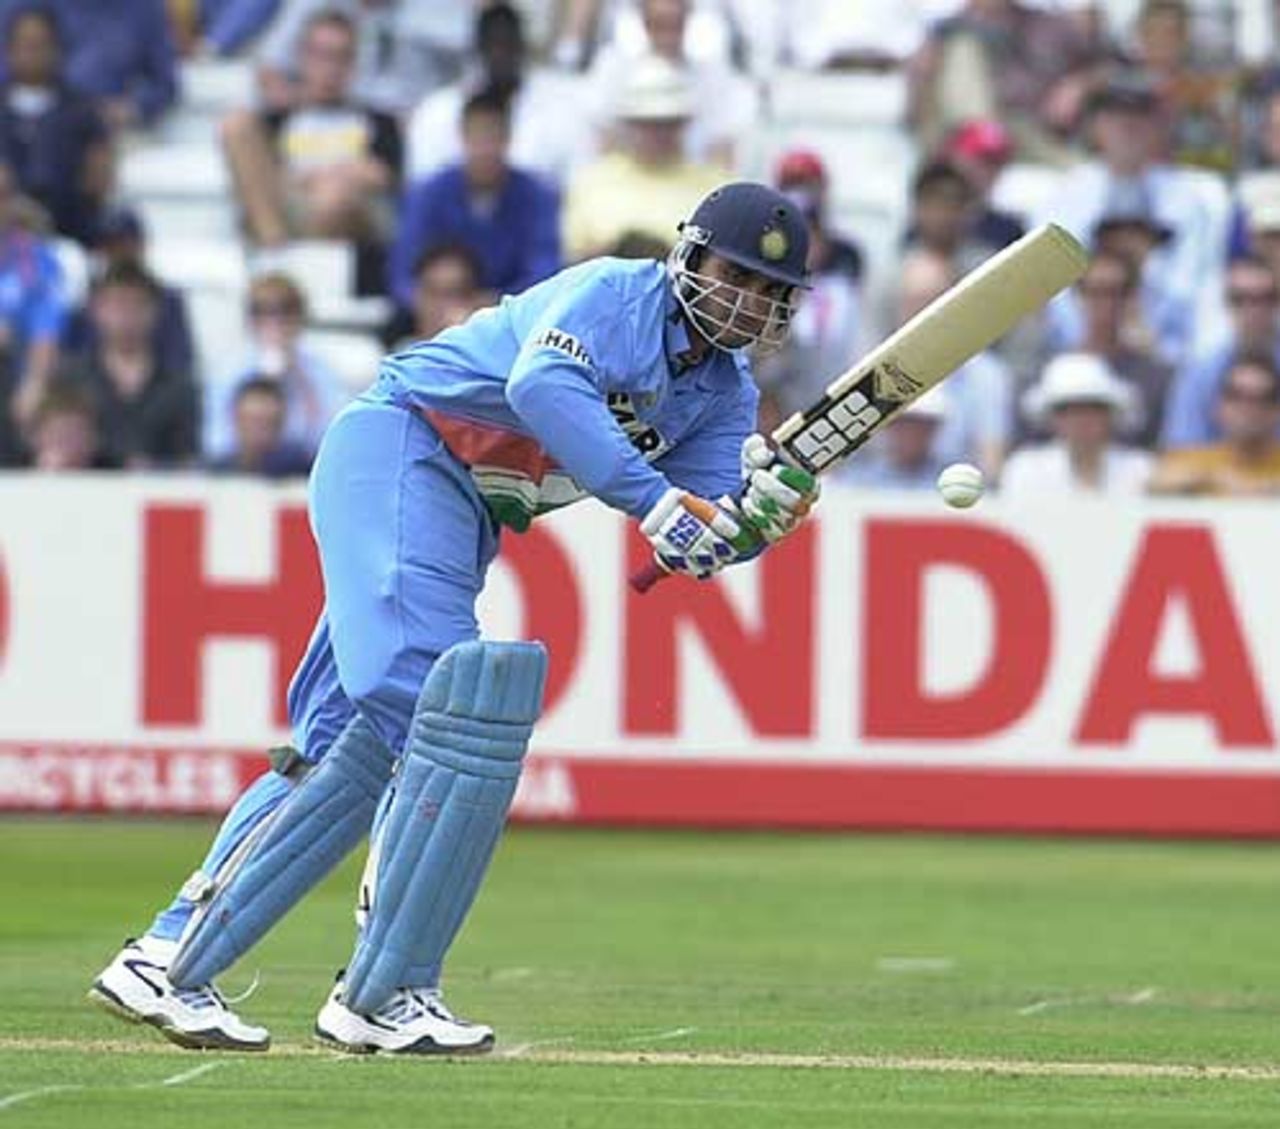 Ganguly, a study in concentration as India advance to a hundred opening partnership, England v India, NatWest Series, Lord's, Sat 29 Jun